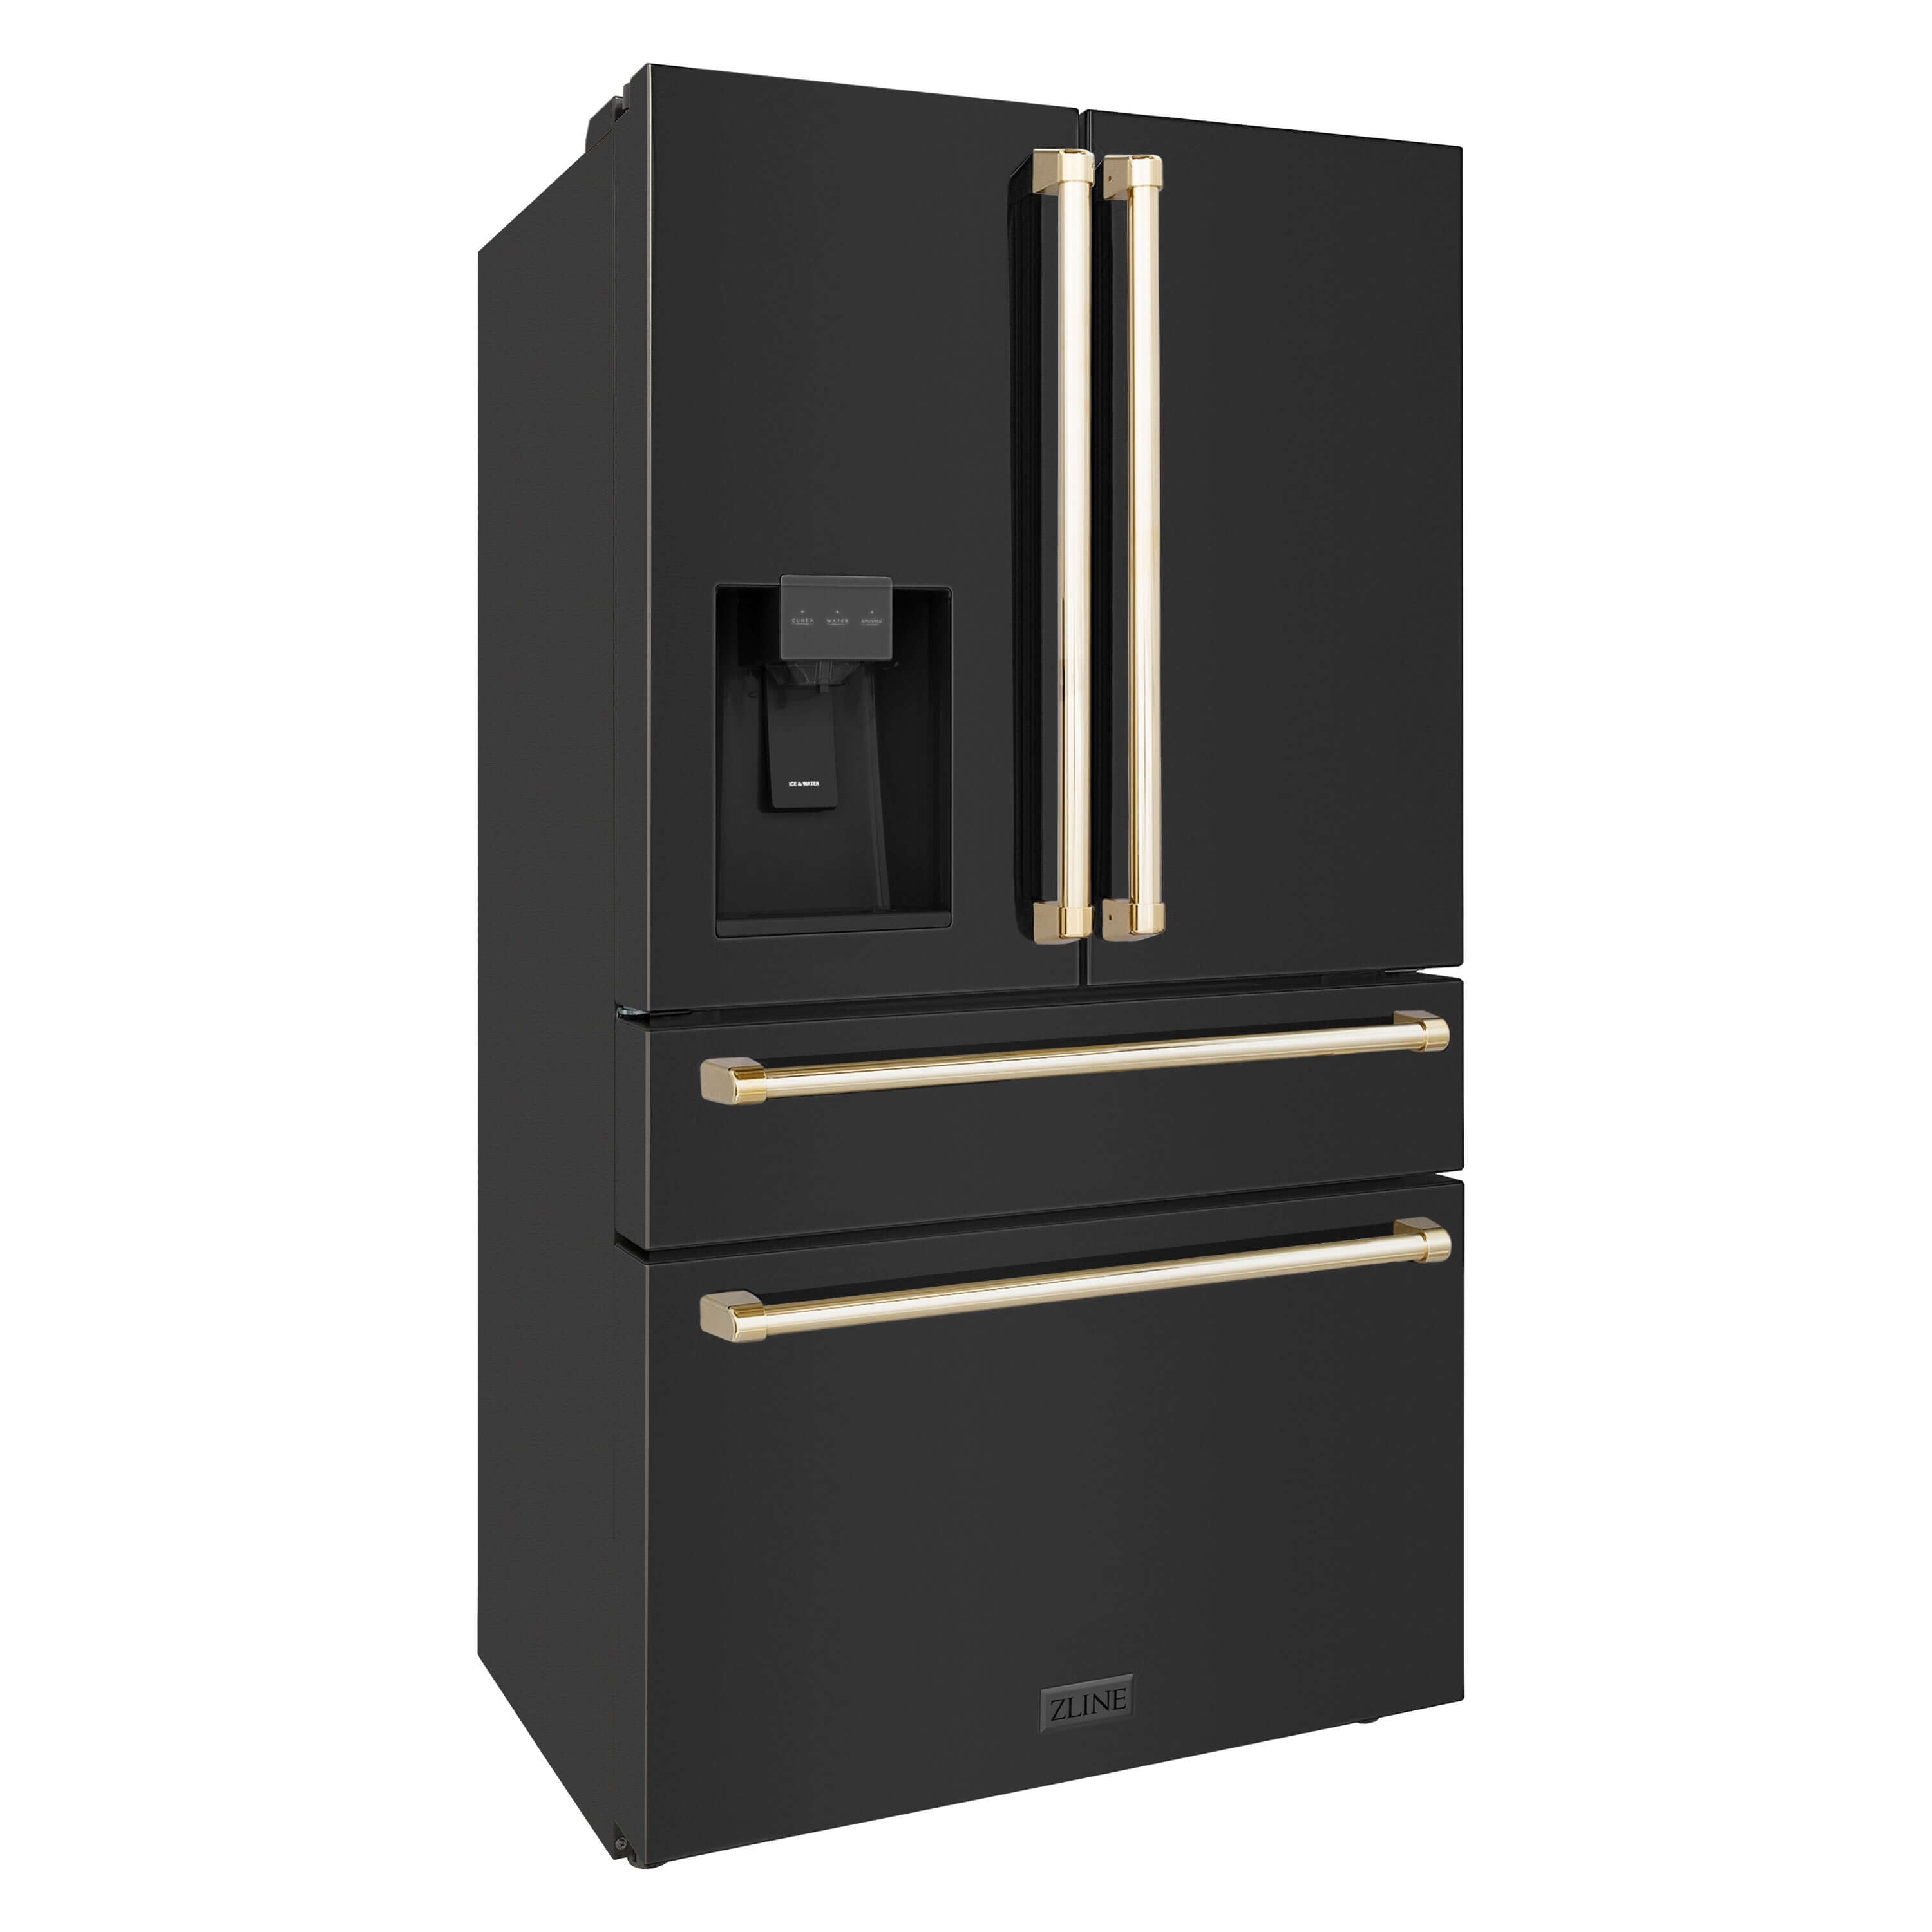 ZLINE 36 in. Autograph Edition 21.6 cu. ft Freestanding French Door Refrigerator with Water and Ice Dispenser in Fingerprint Resistant Black Stainless Steel with Polished Gold Accents (RFMZ-W-36-BS-G)